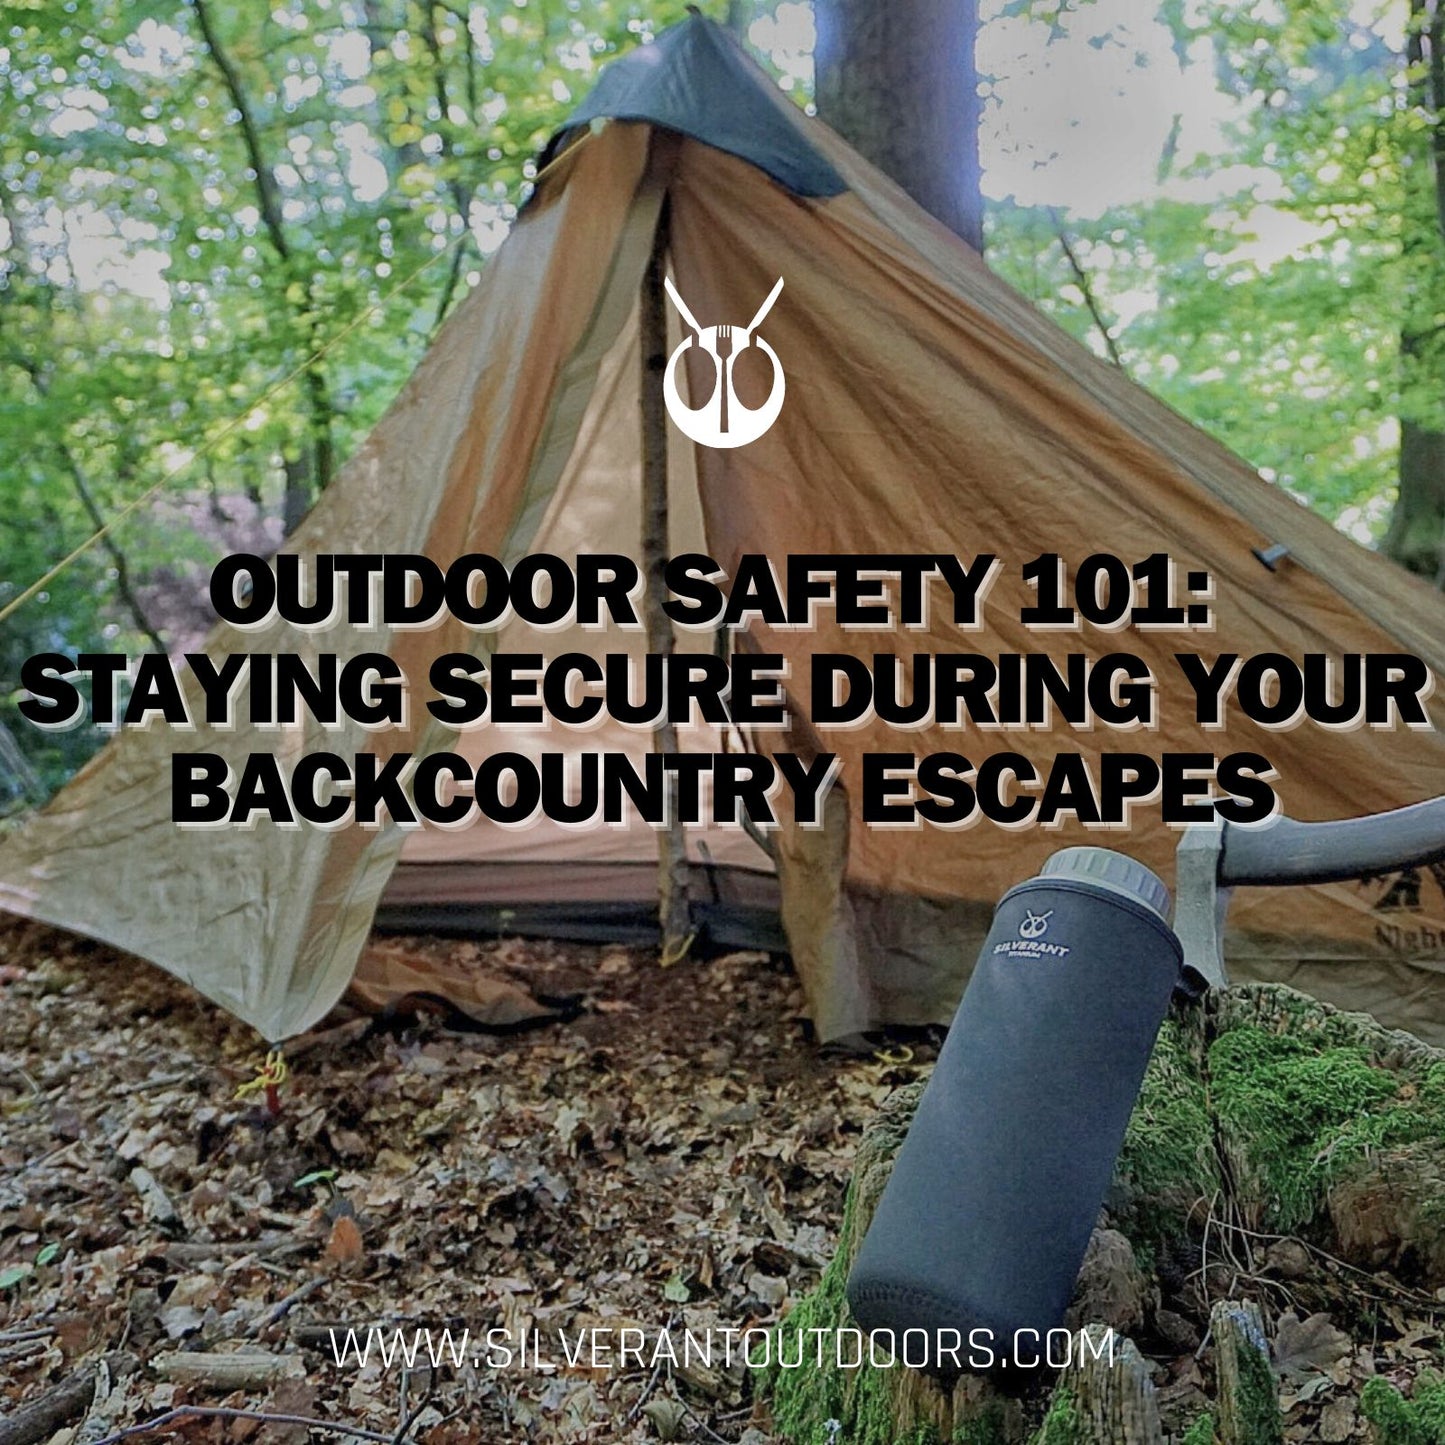 Outdoor Safety 101: Staying Secure During Your Backcountry Escapes